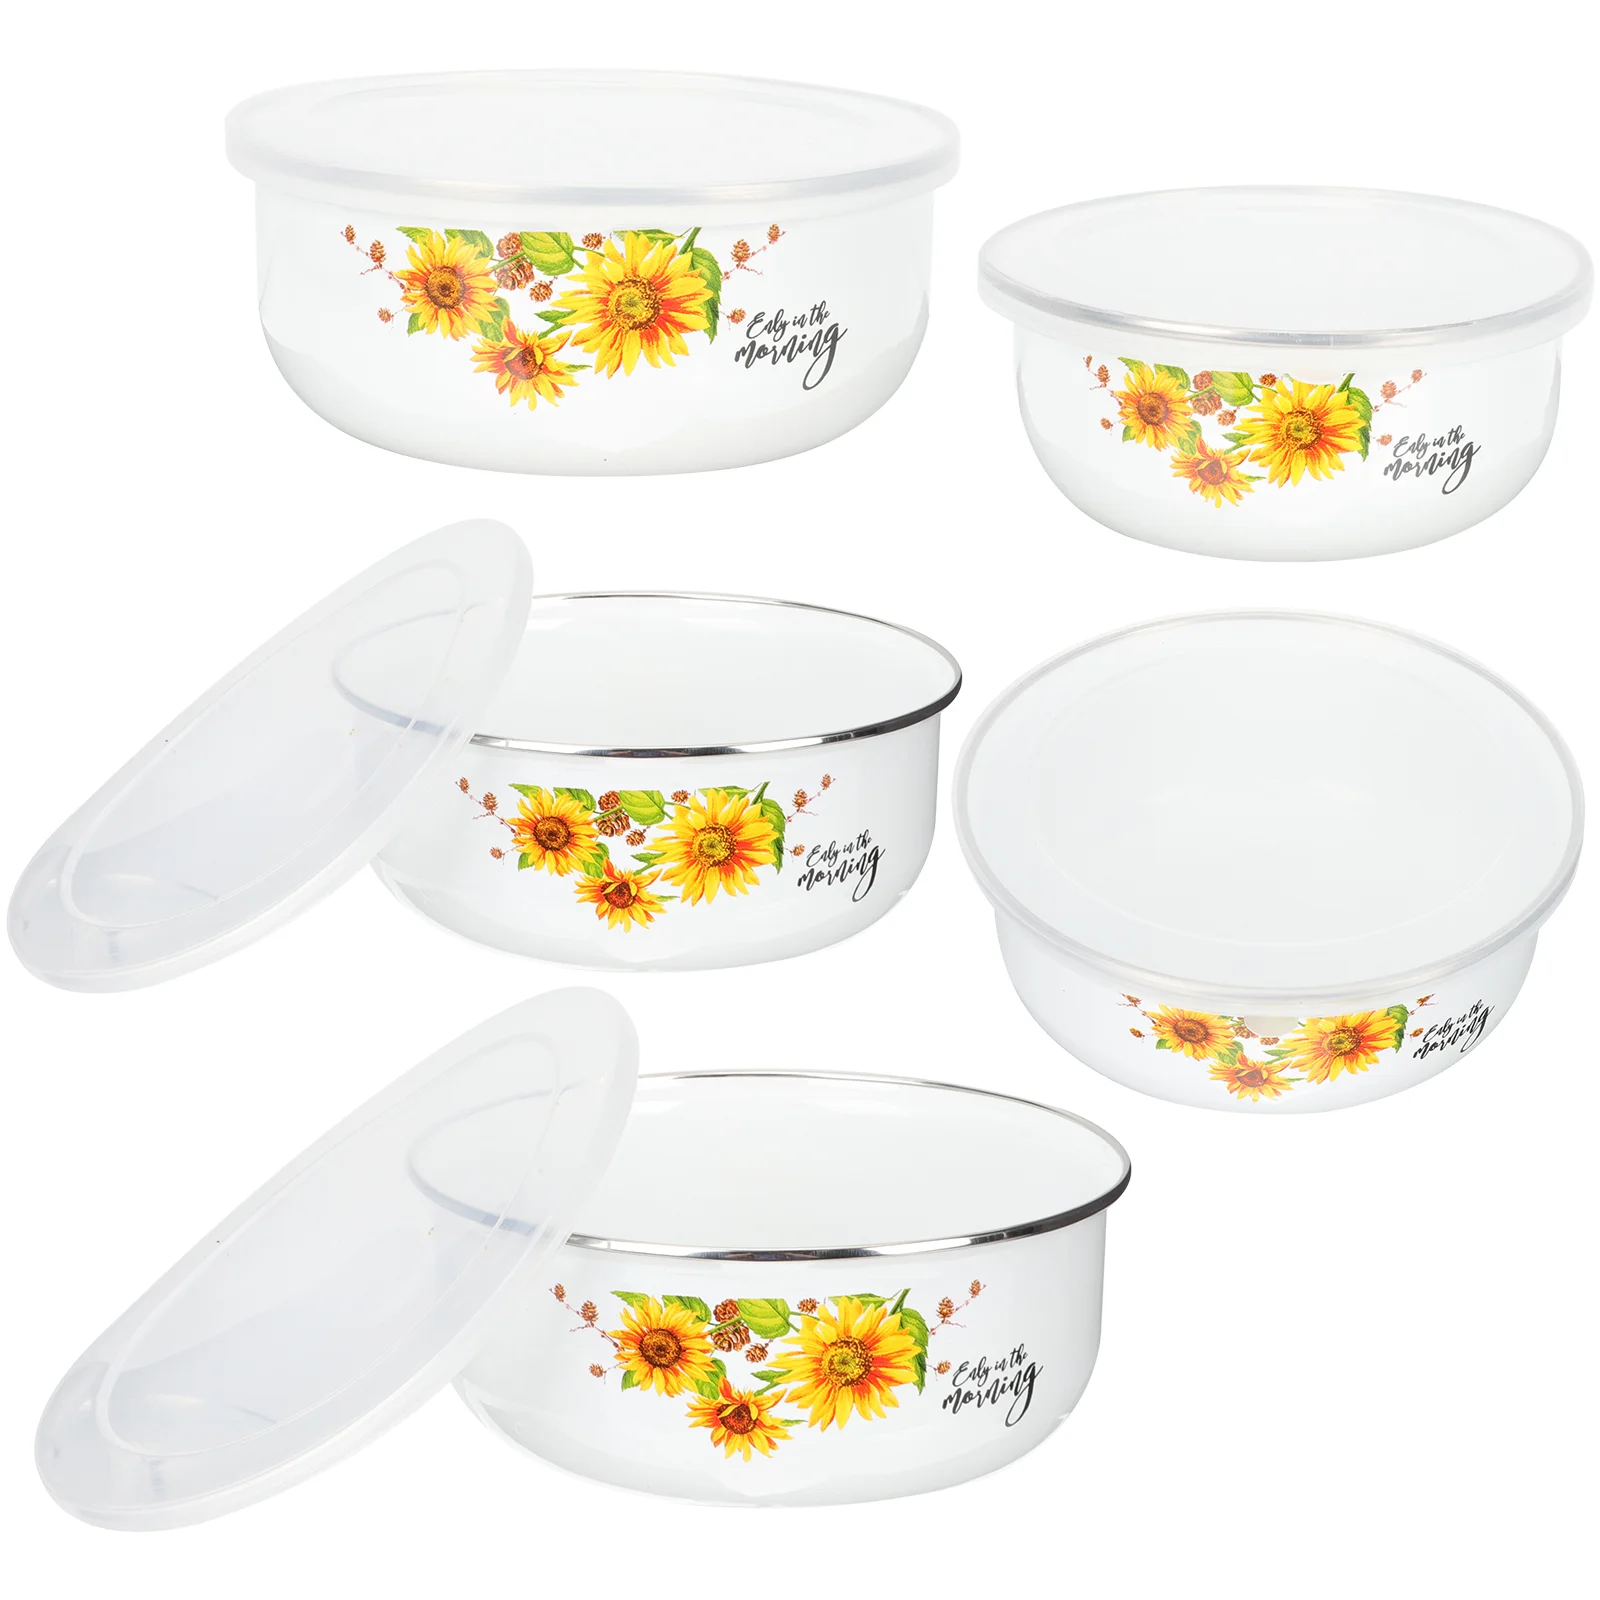 

Bowl Bowls Salad Mixing Enamel Noodle Soup Kitchen Instant Ceramic Lids Lid Rice Container Basin Camping Fresh Egg Keeping Box